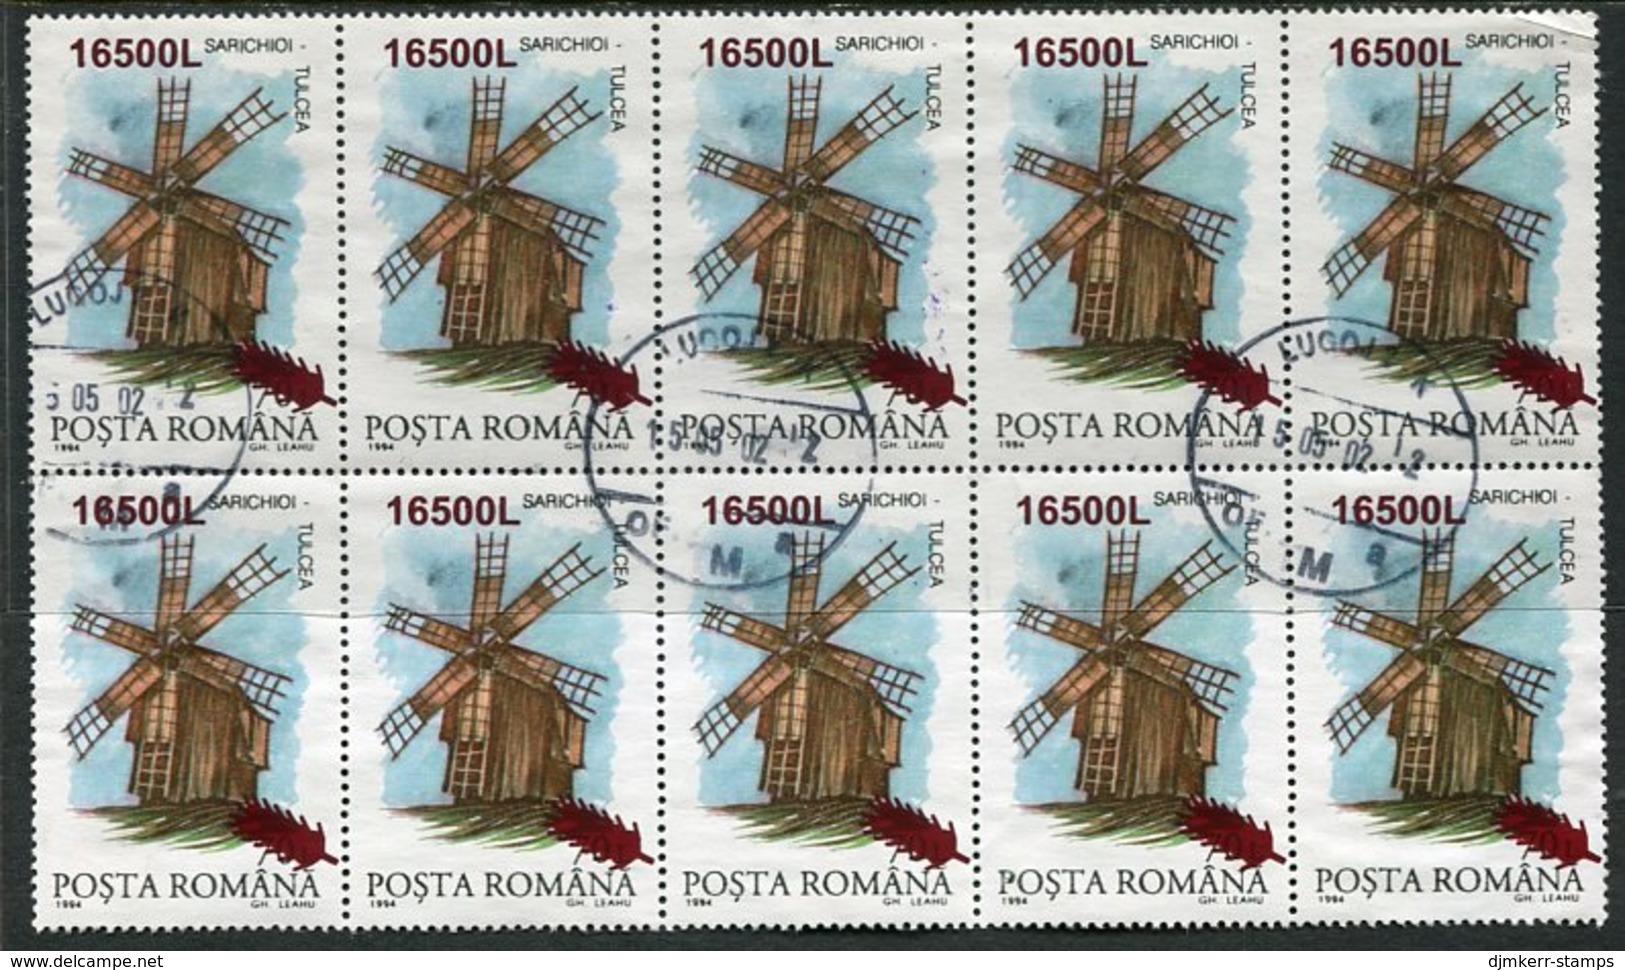 ROMANIA 2001 Windmill 70 L. Surcharged 16500 Block Of 10 Used.  Michel 5559 - Used Stamps